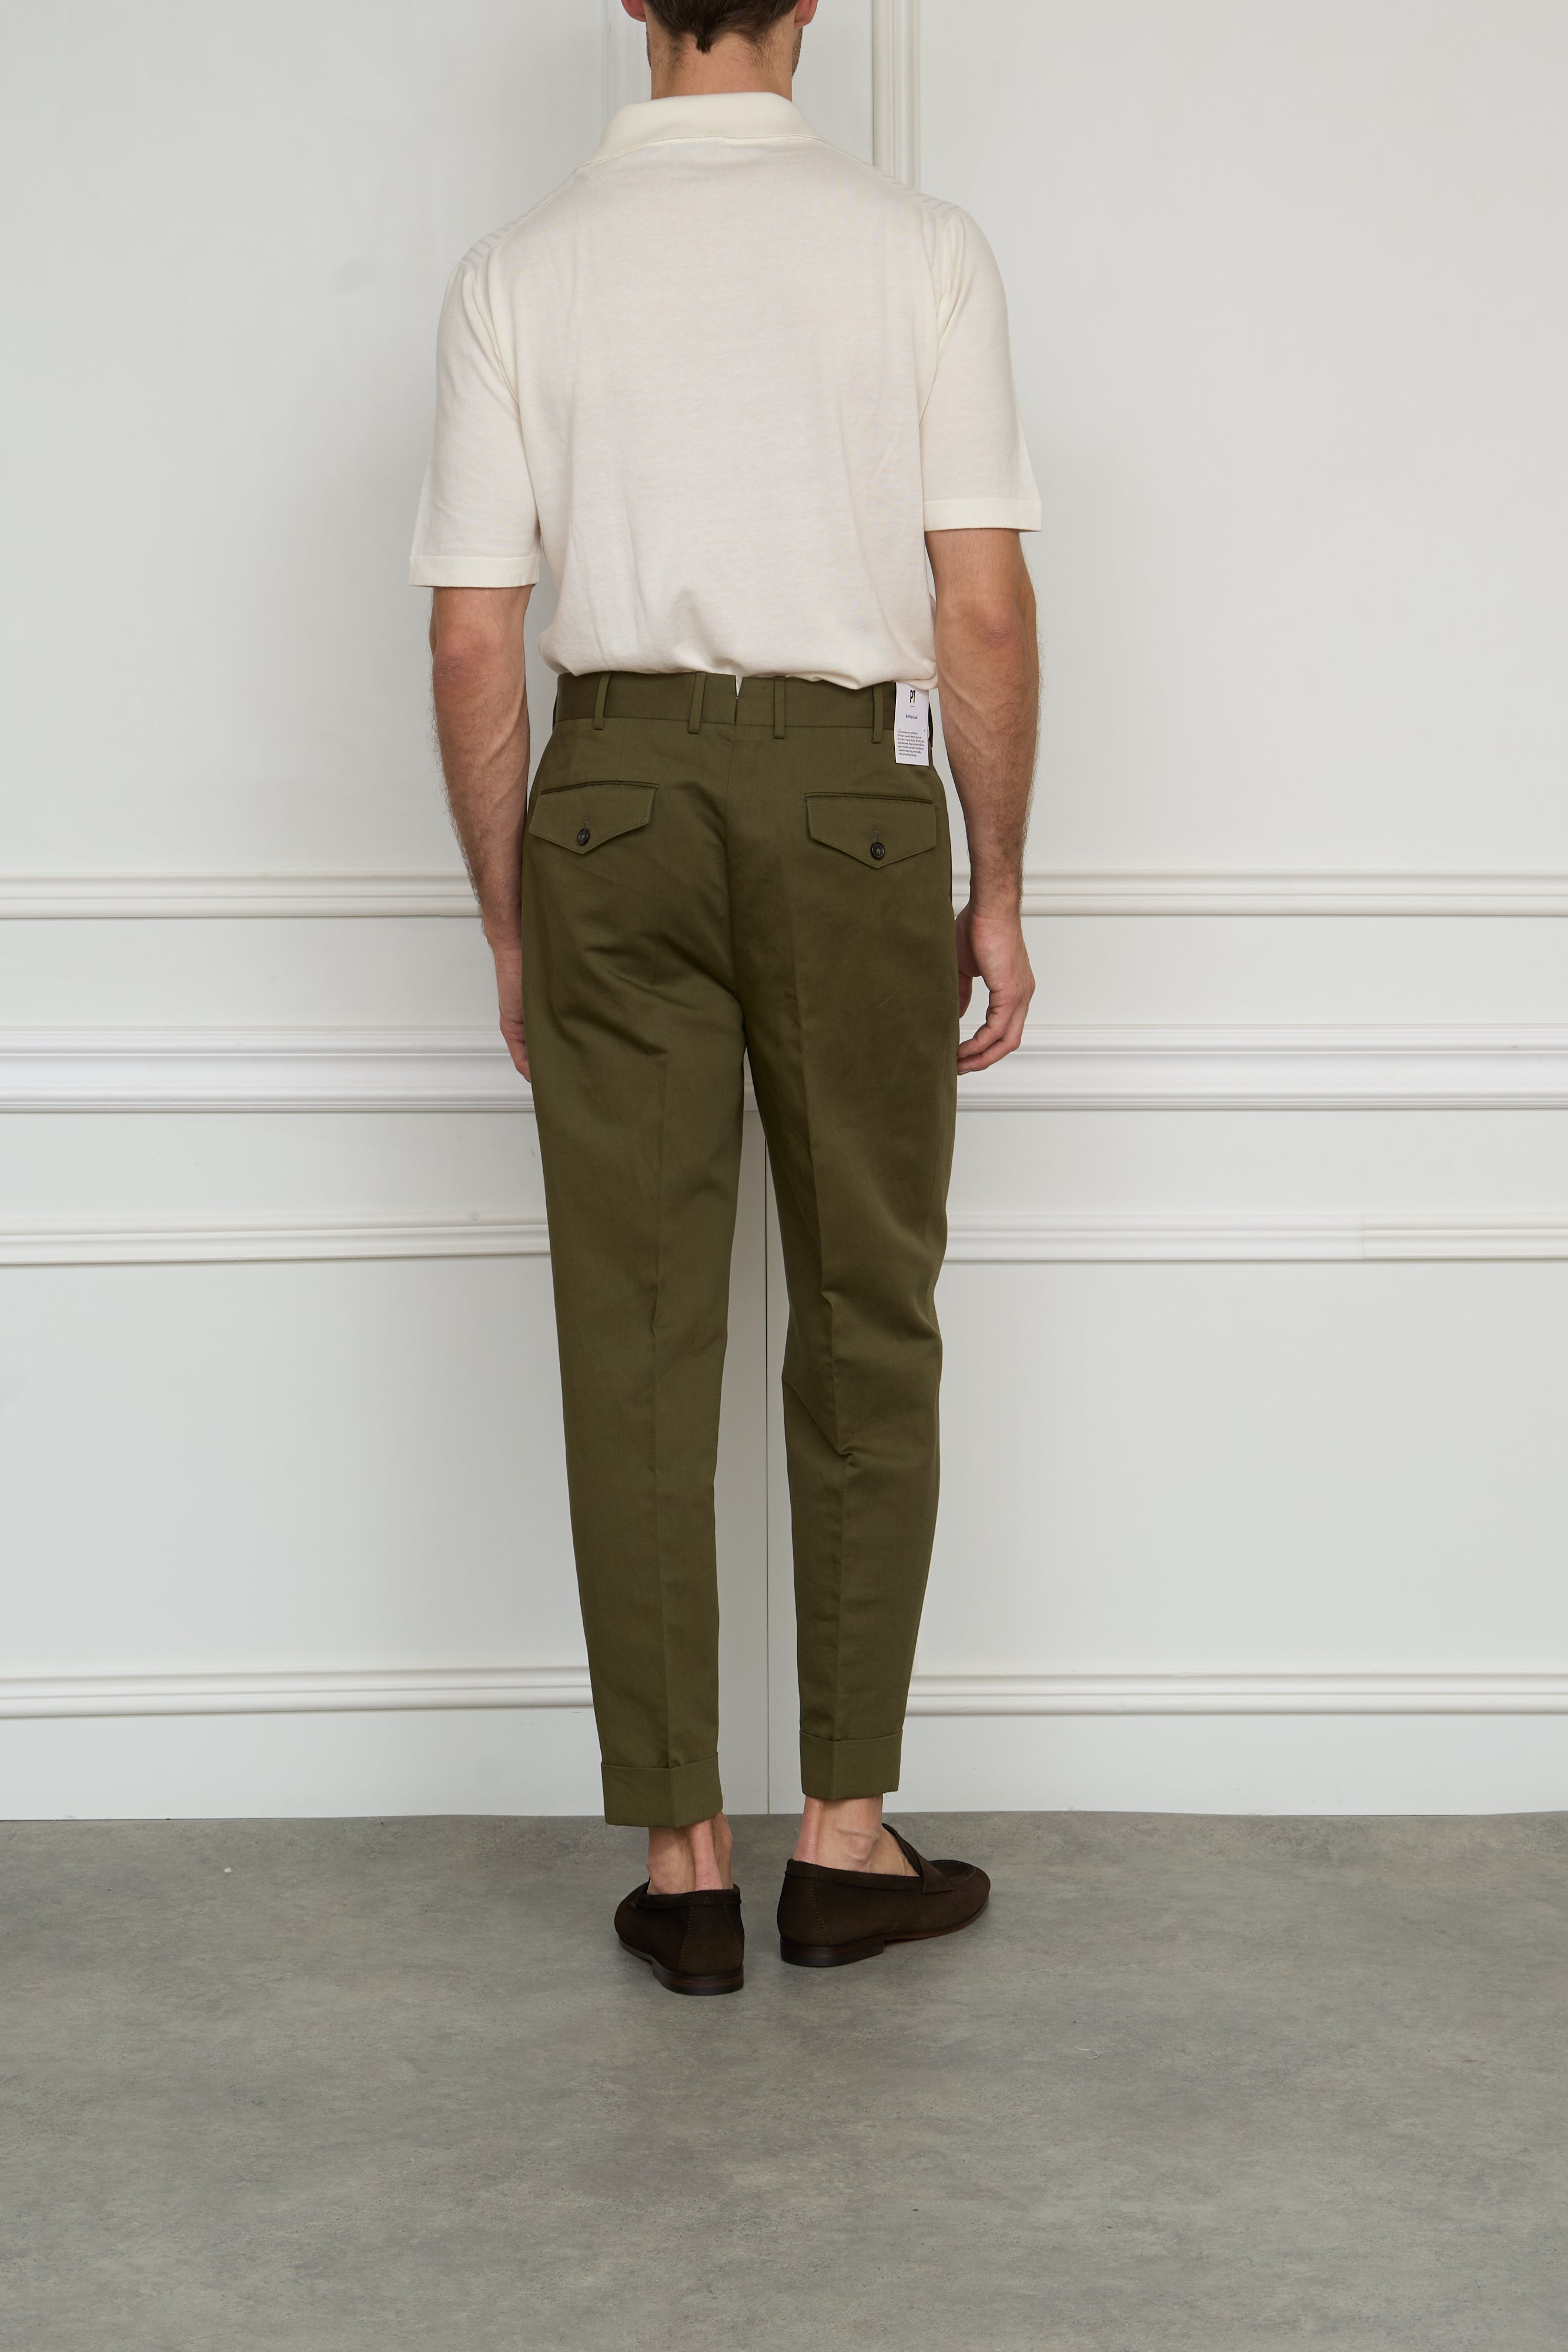 Chino in olive